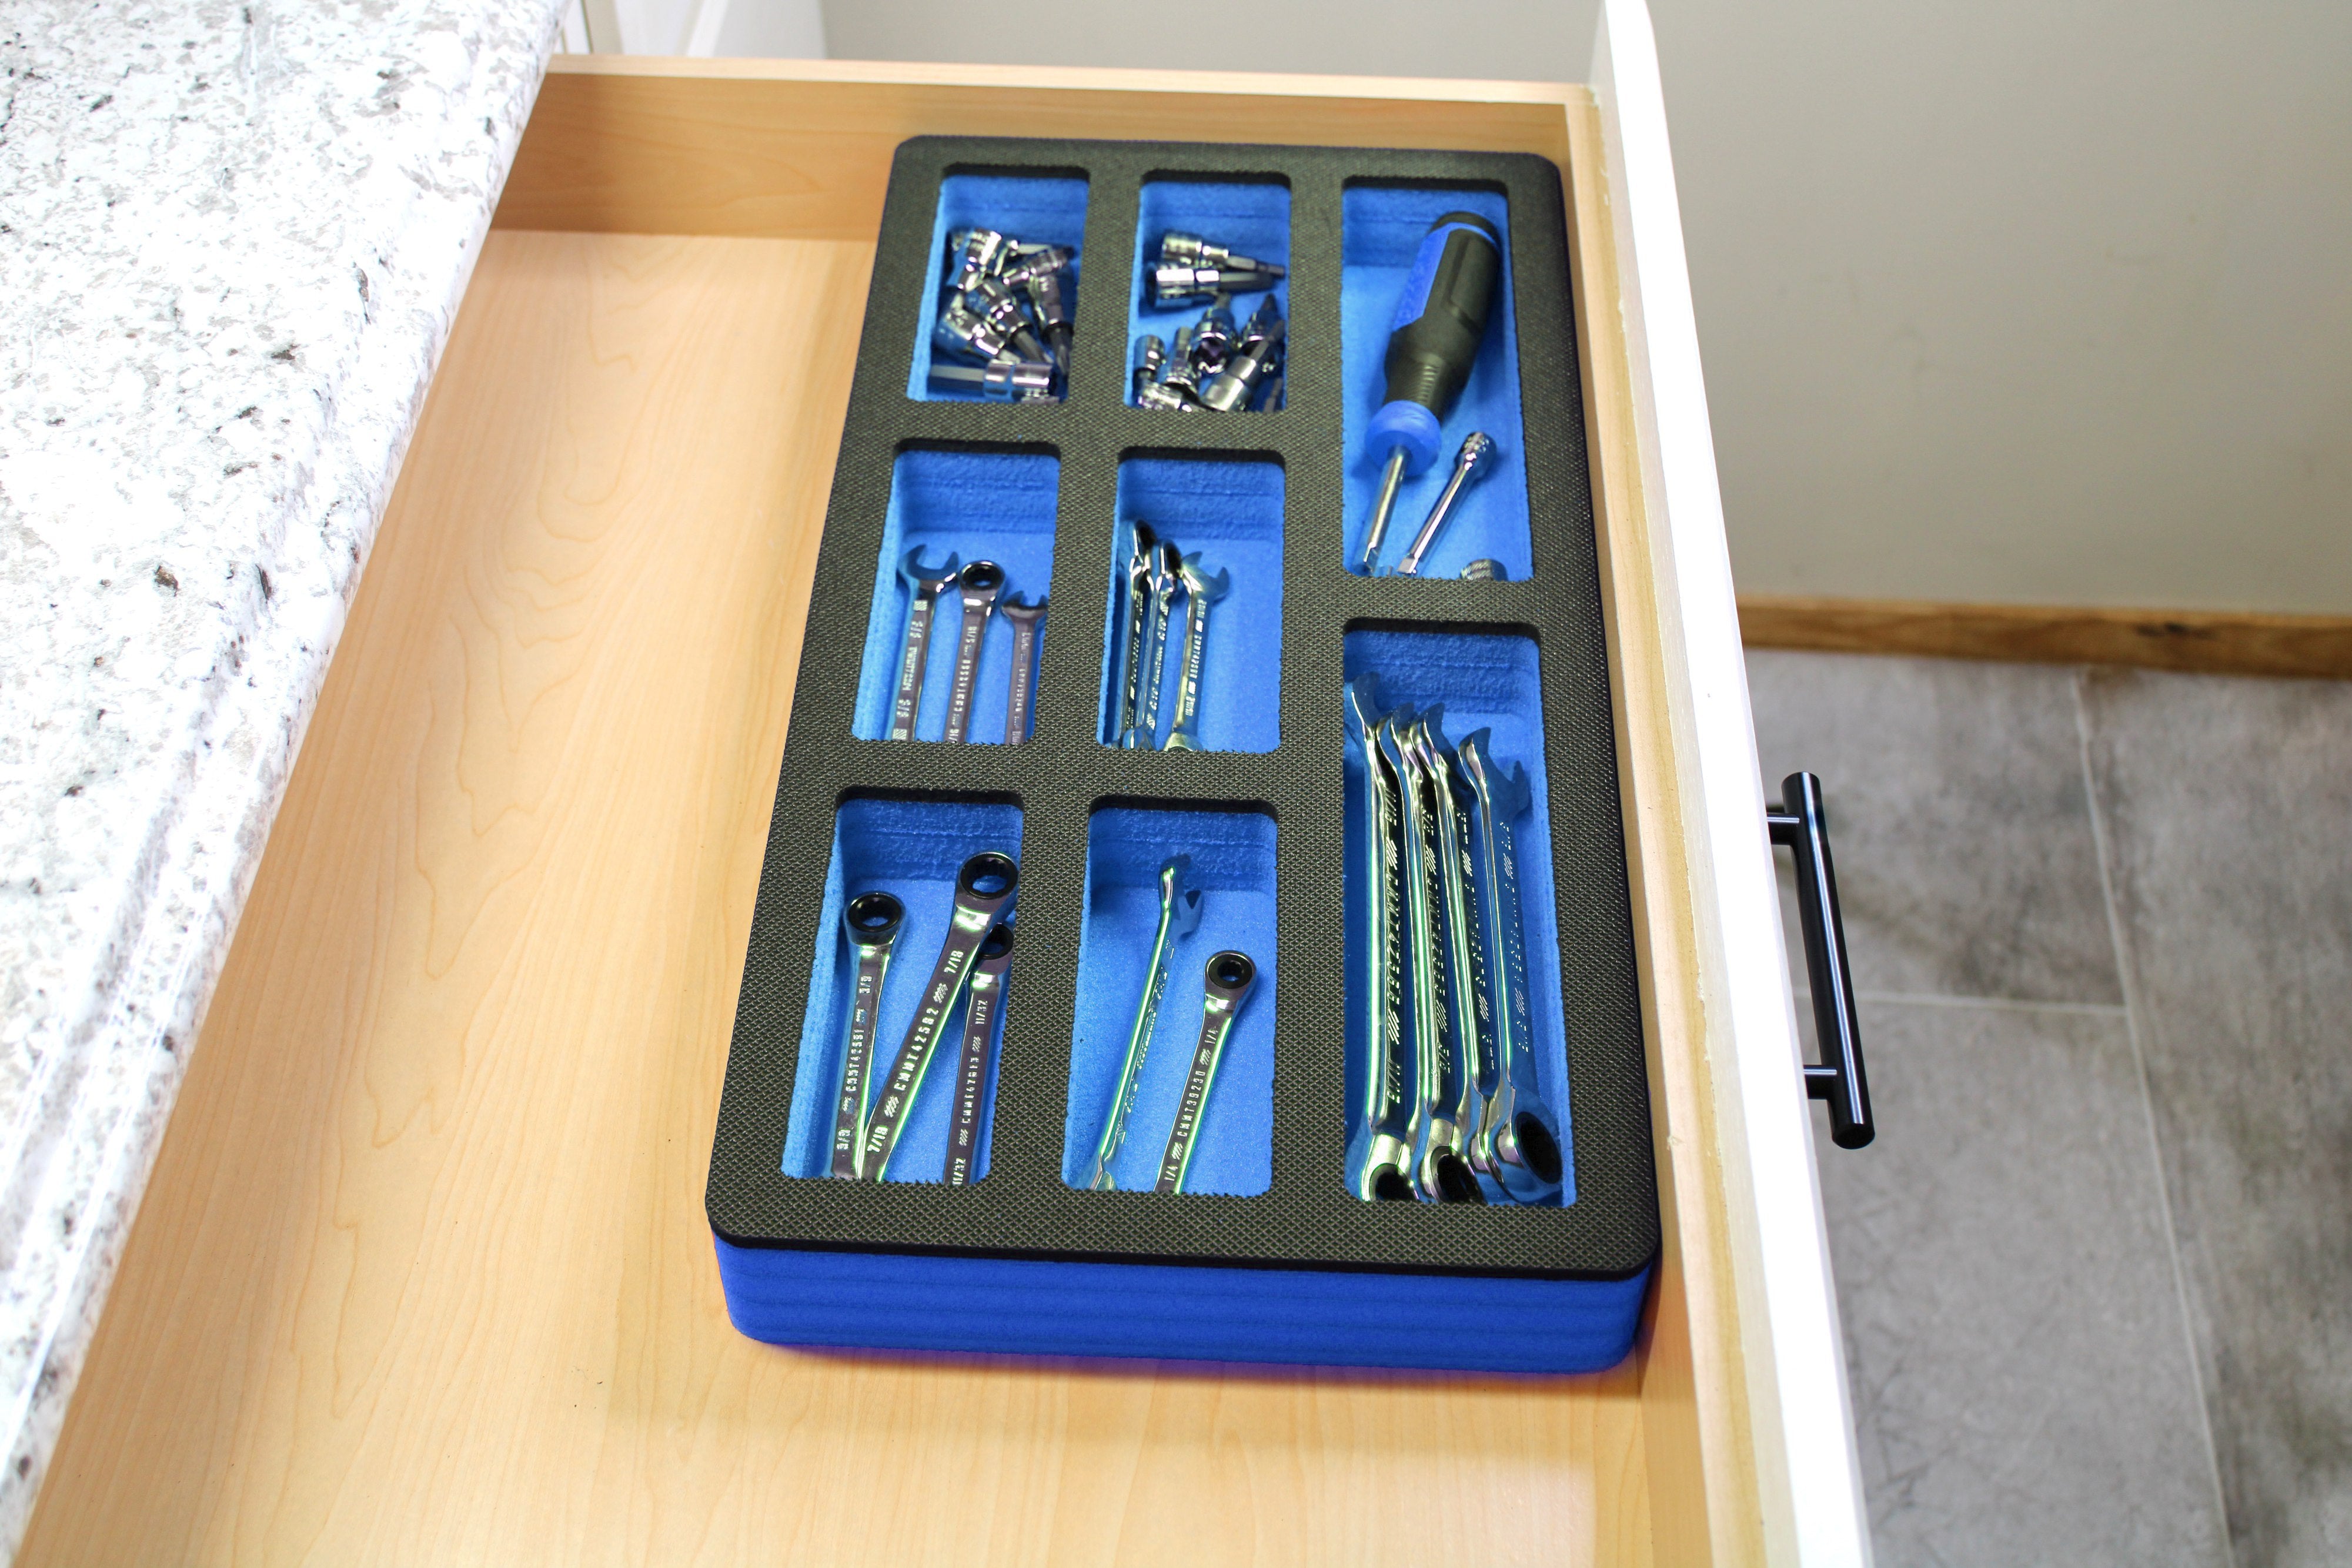 Tool Drawer Organizer Insert Blue and Black Durable Foam Strong Non-Slip Anti-Rattle Bin Holder Tray 20 x 10 Inches 8 Pockets Fits Craftsman Husky Kobalt Milwaukee and Many Others